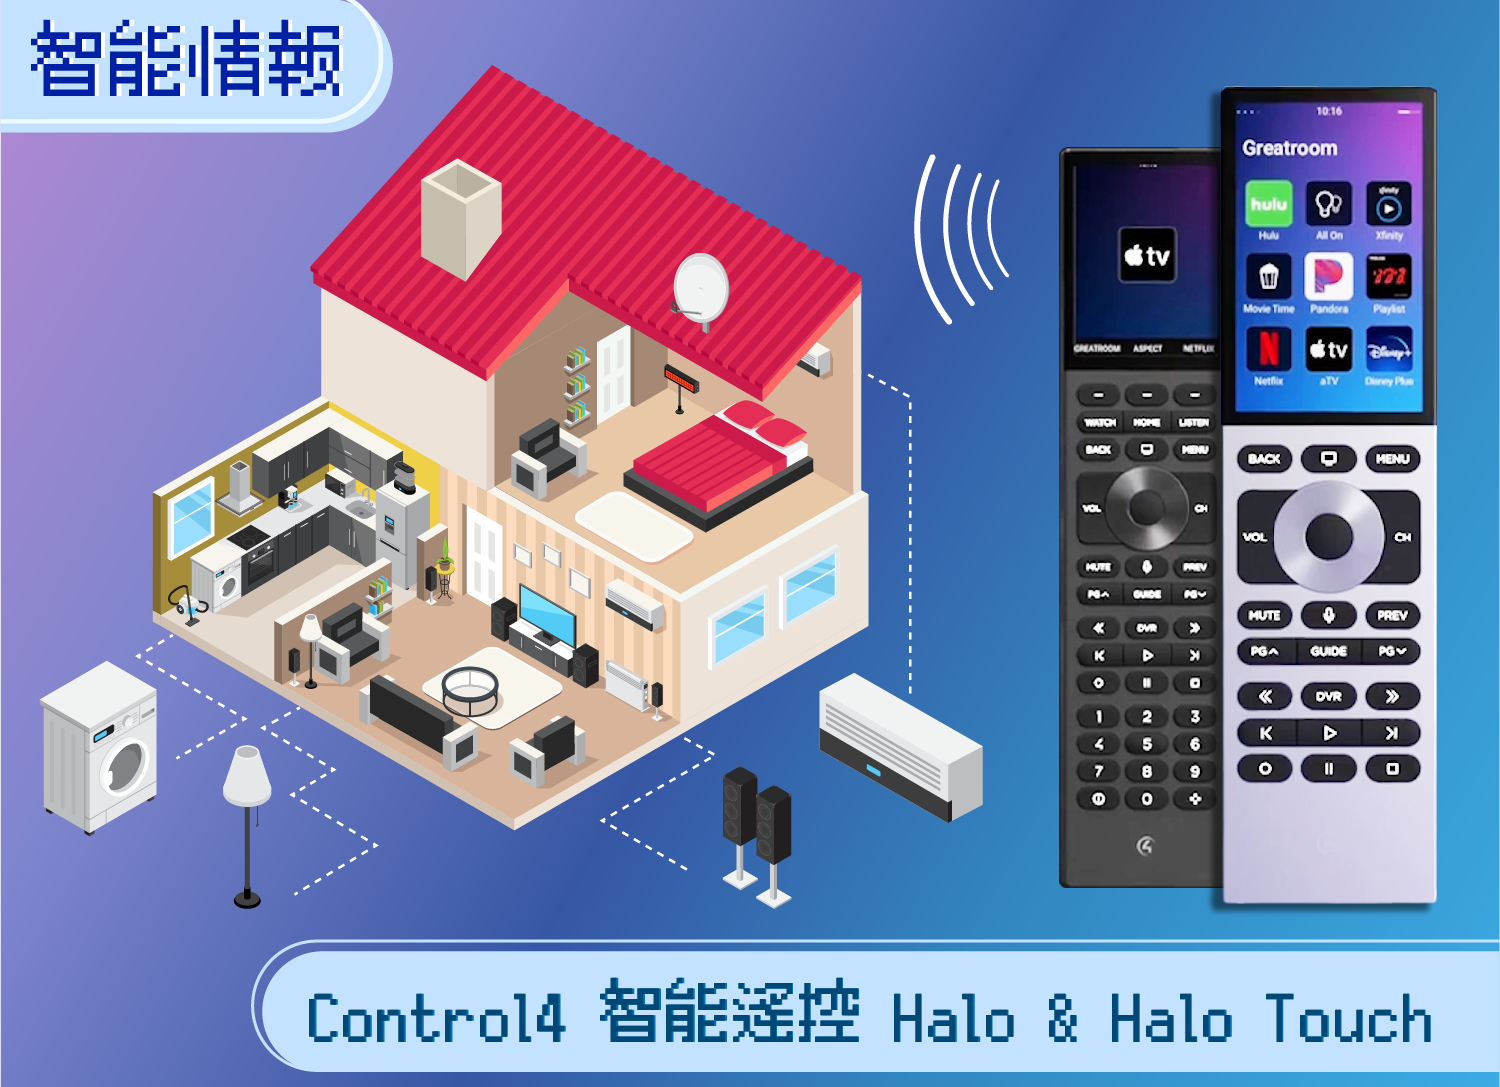 New Home Automation Experience with CONTROL4® HALO REMOTE!!